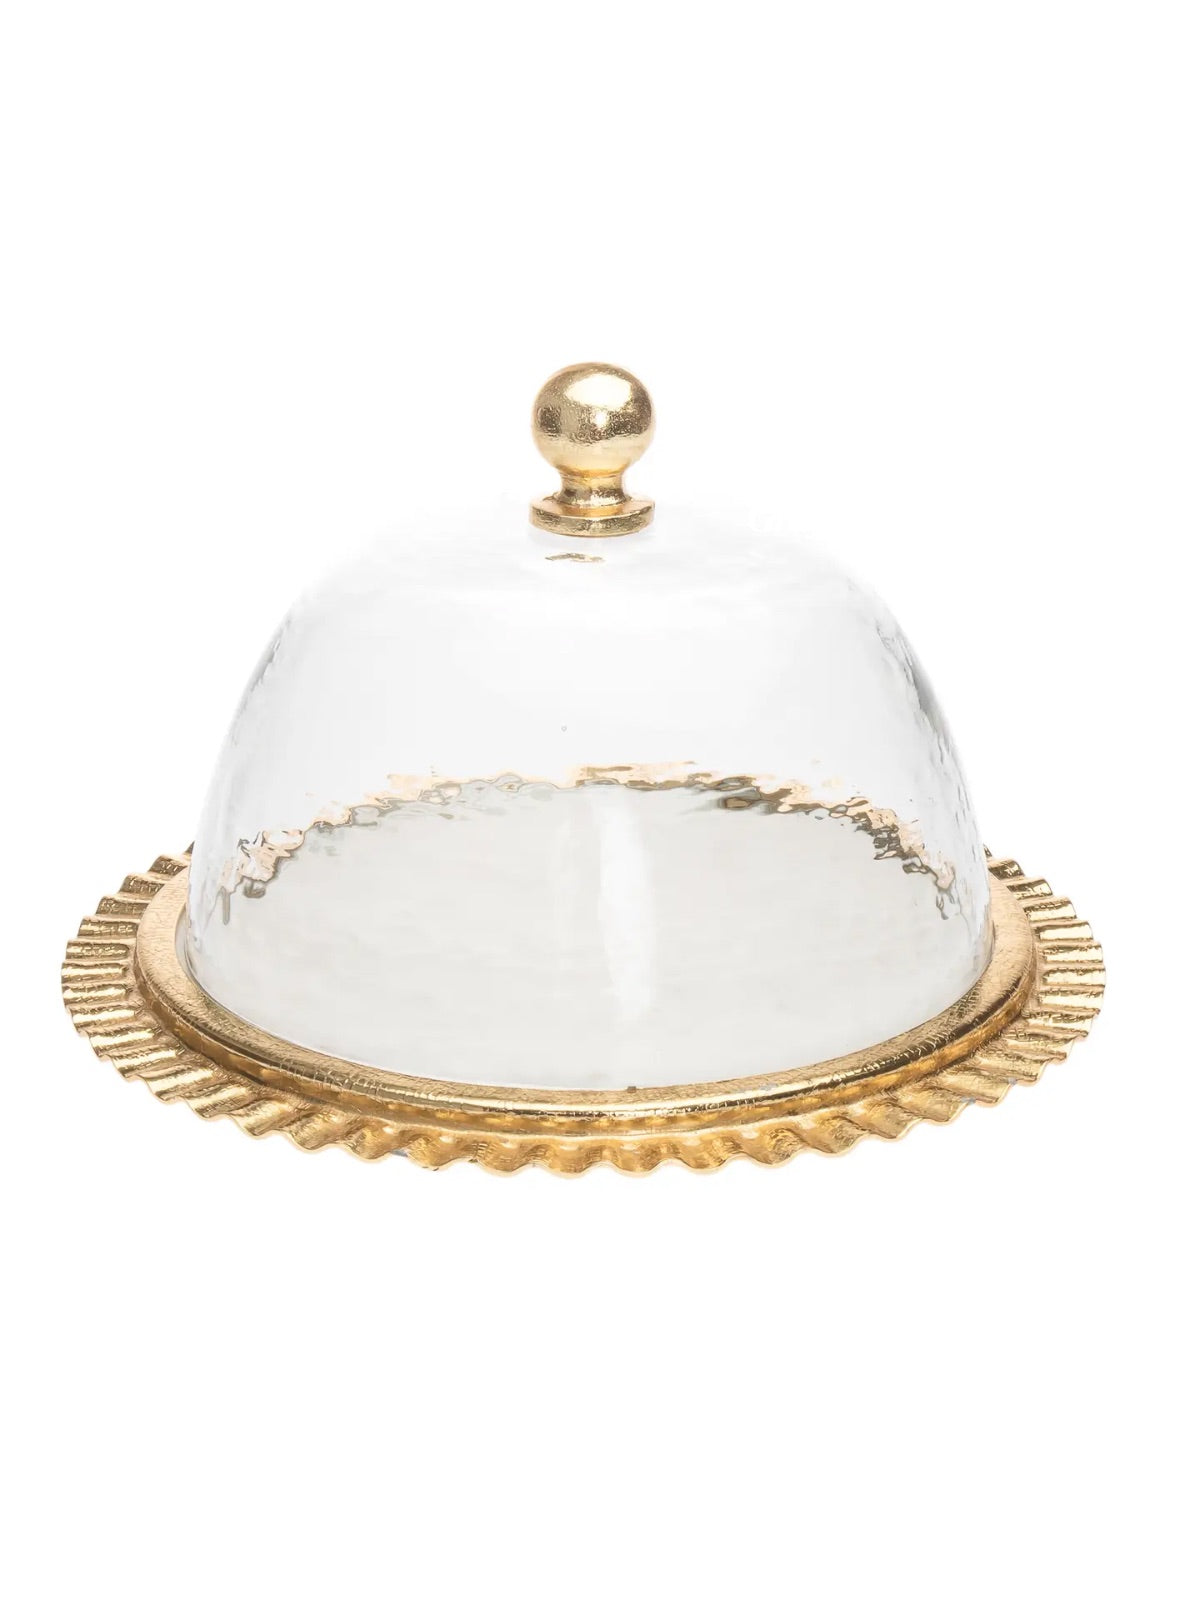 Gold ripple-edged Marble Cake Plate with glass dome measuring 13D x 8H inches. Made of Stainless Steel and Glass.